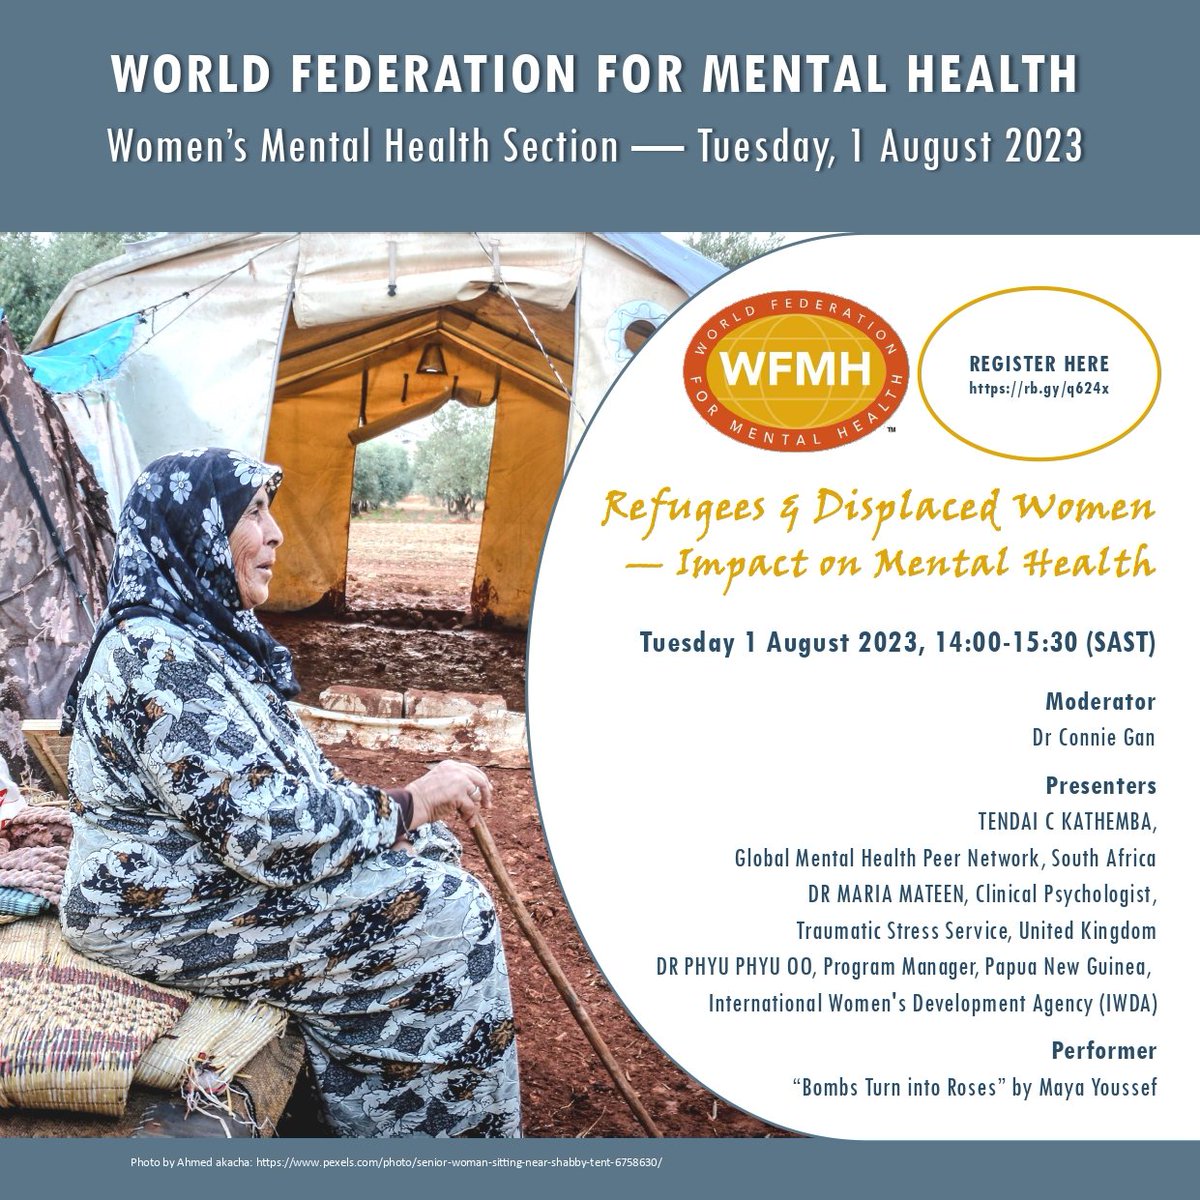 The Women's Mental Health section of the World Federation for Mental Health is organizing a webinar on 'Refugees and Displaced Women - Impact on Mental Health' to be held on Tuesday 1 August 2023 at 2pm-3.30pm (SAST).   Register at us06web.zoom.us/meeting/regist…